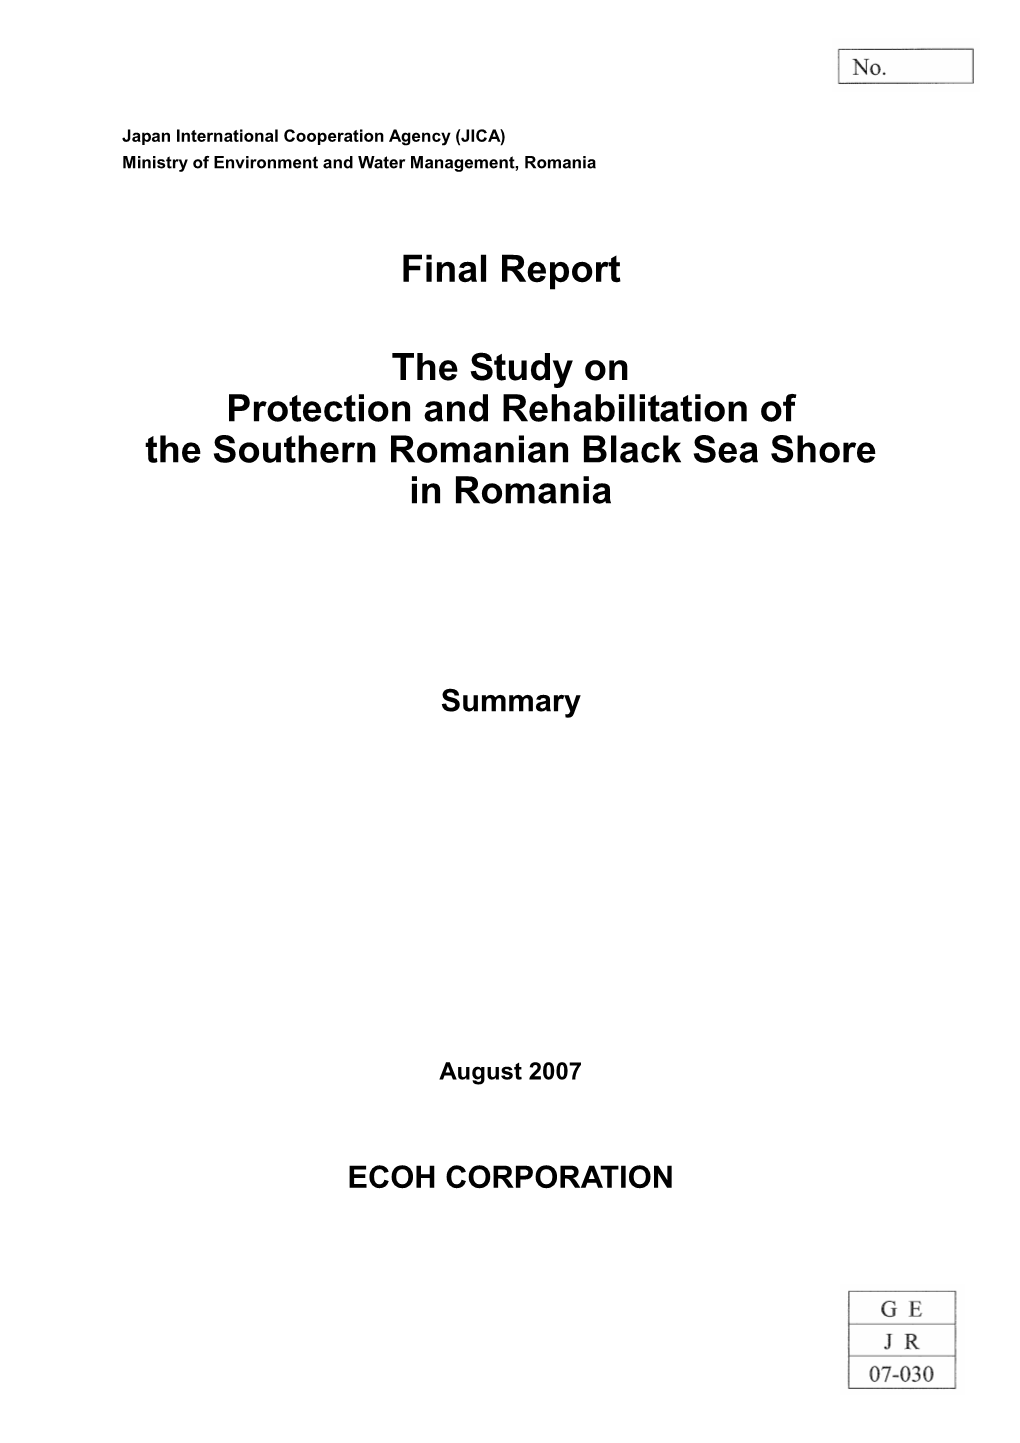 Final Report the Study on Protection and Rehabilitation of the Southern